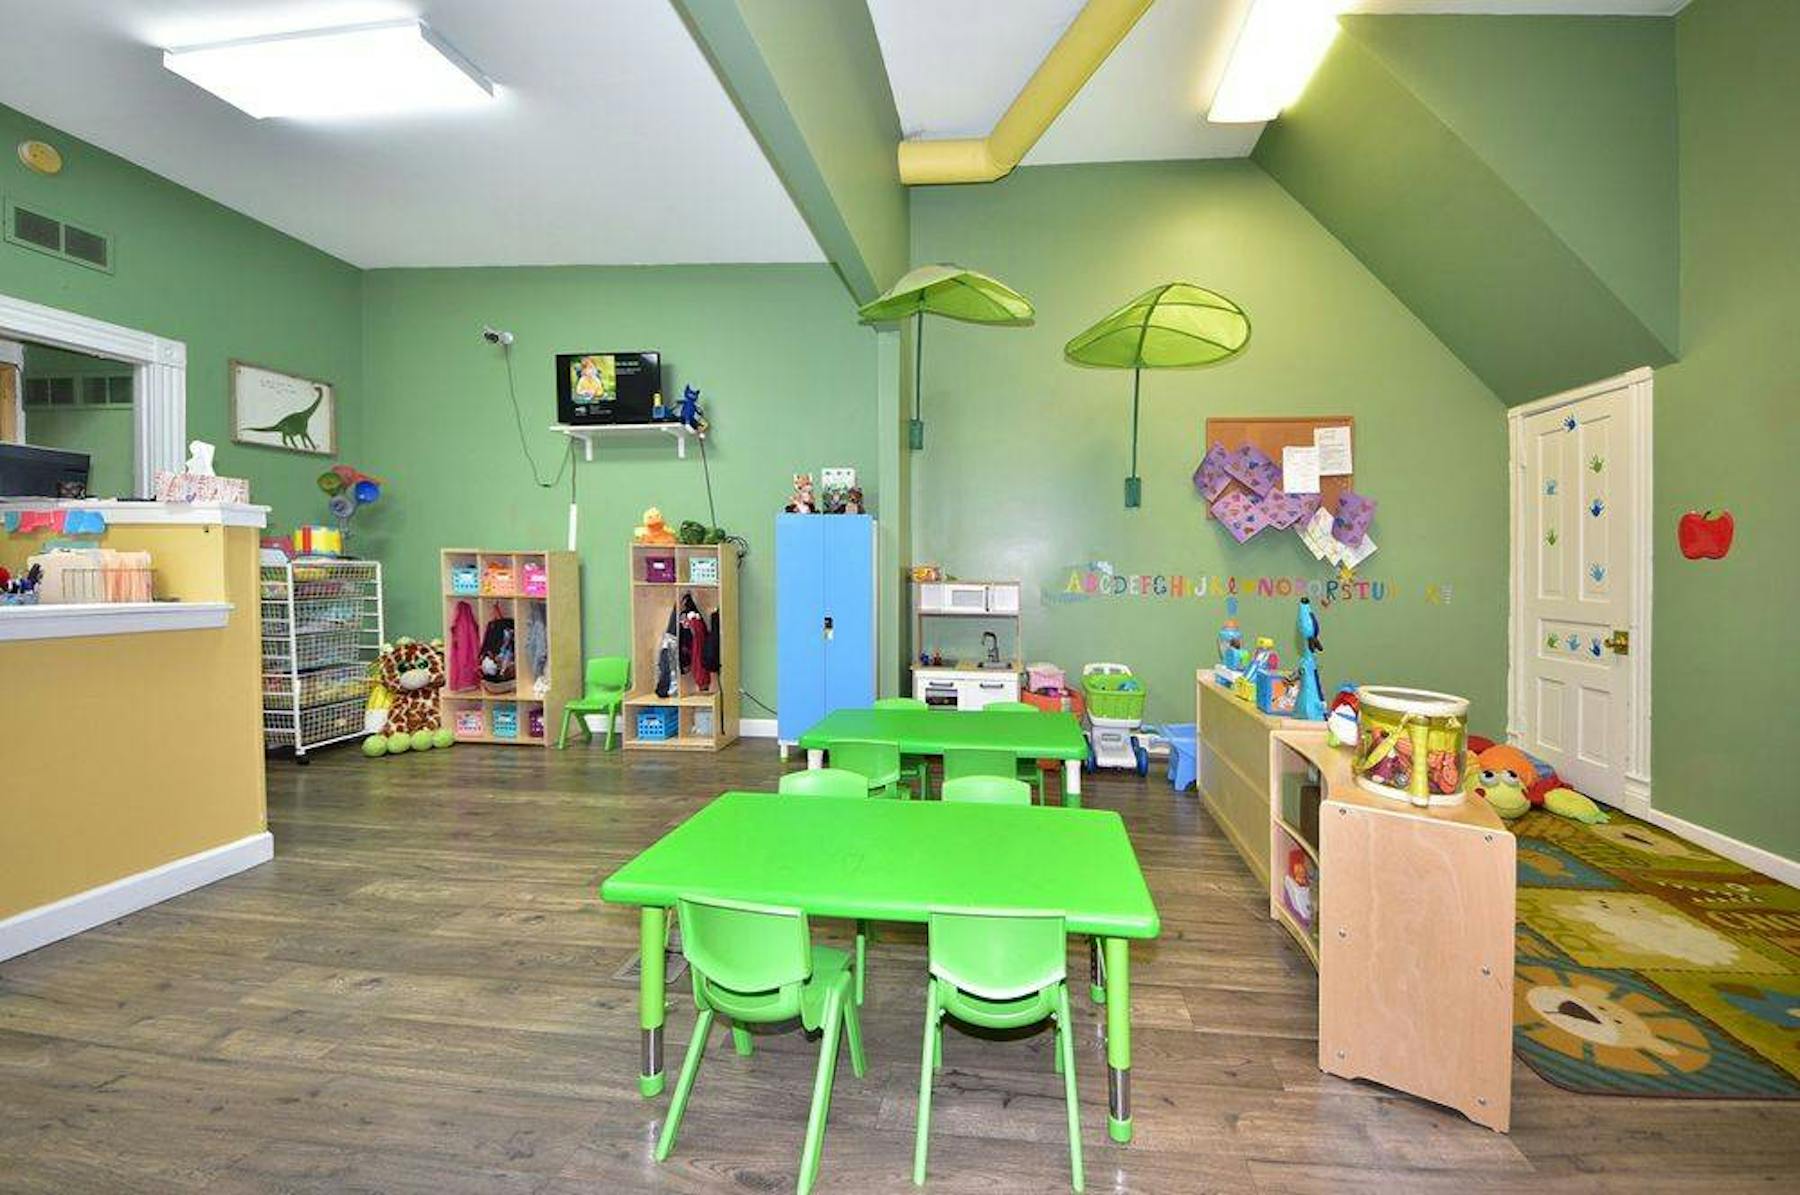 Little Precious Angels Childcare 2 LLC - Daycare in St. Louis, MO - Winnie